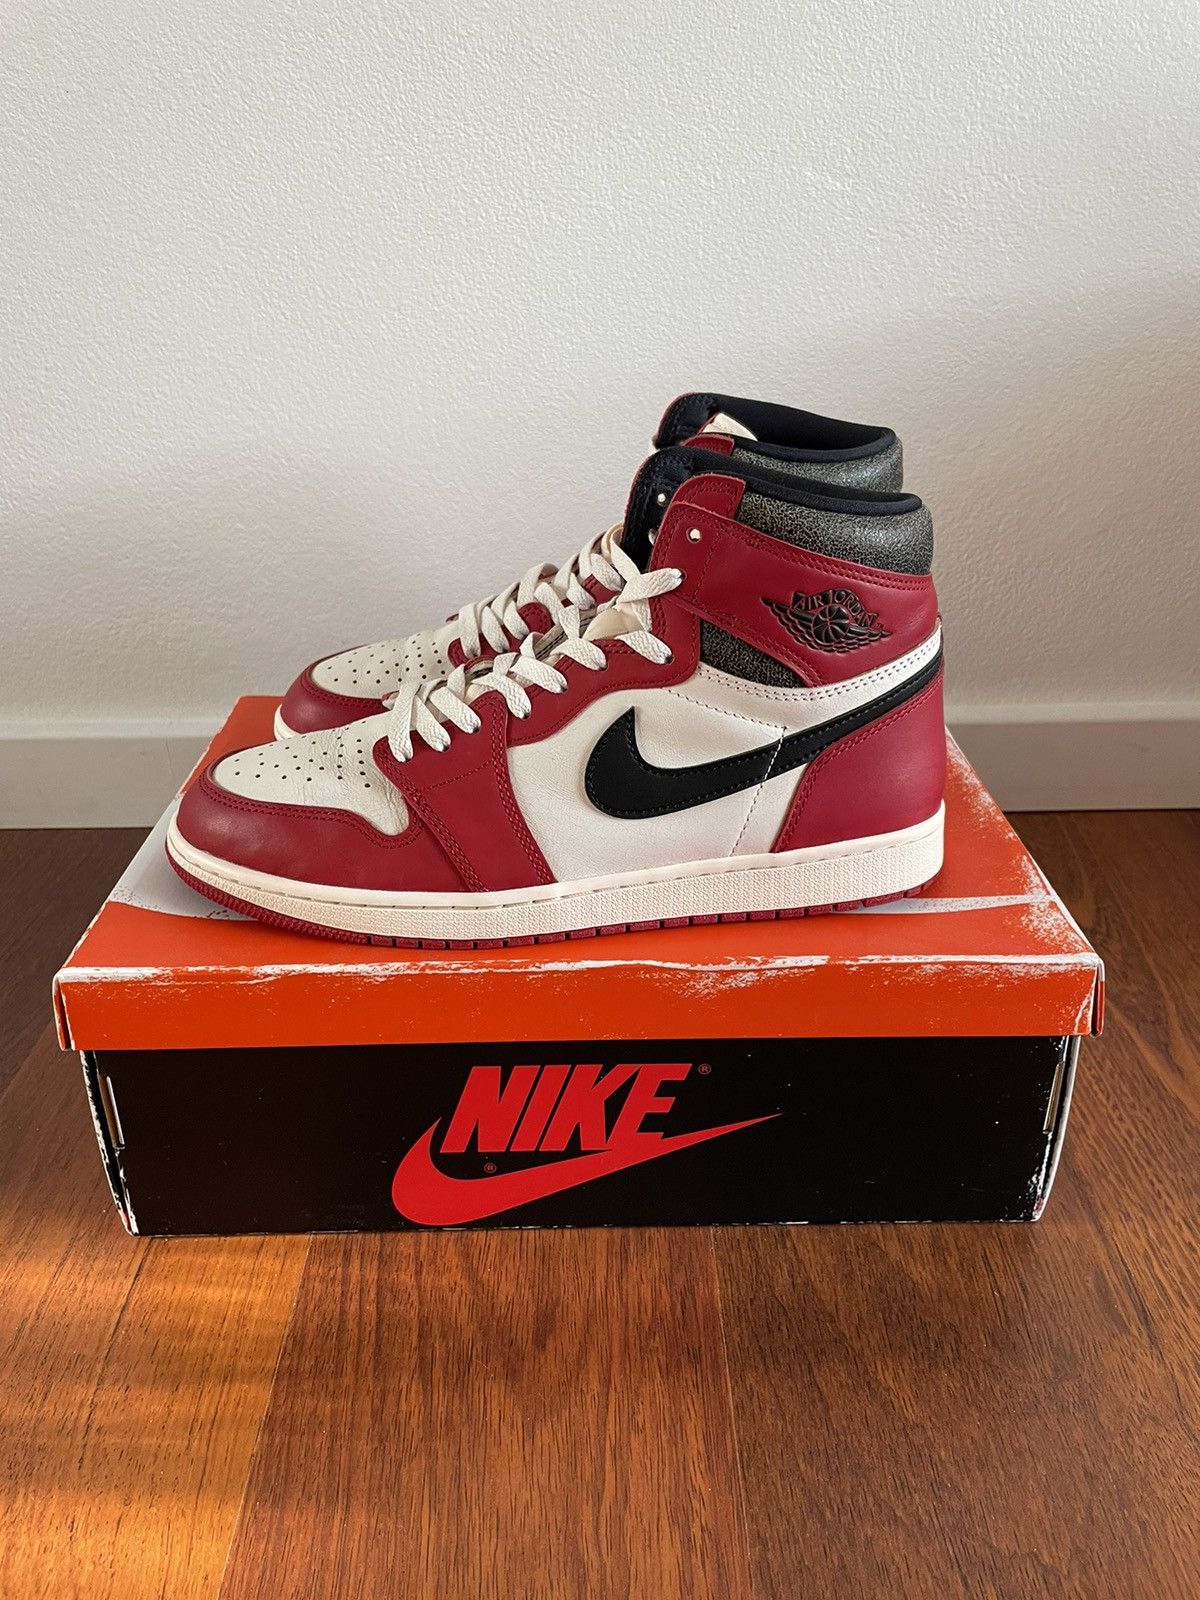 Nike Air Jordan 1 Retro High OG Chicago Lost and Found US11 | Grailed